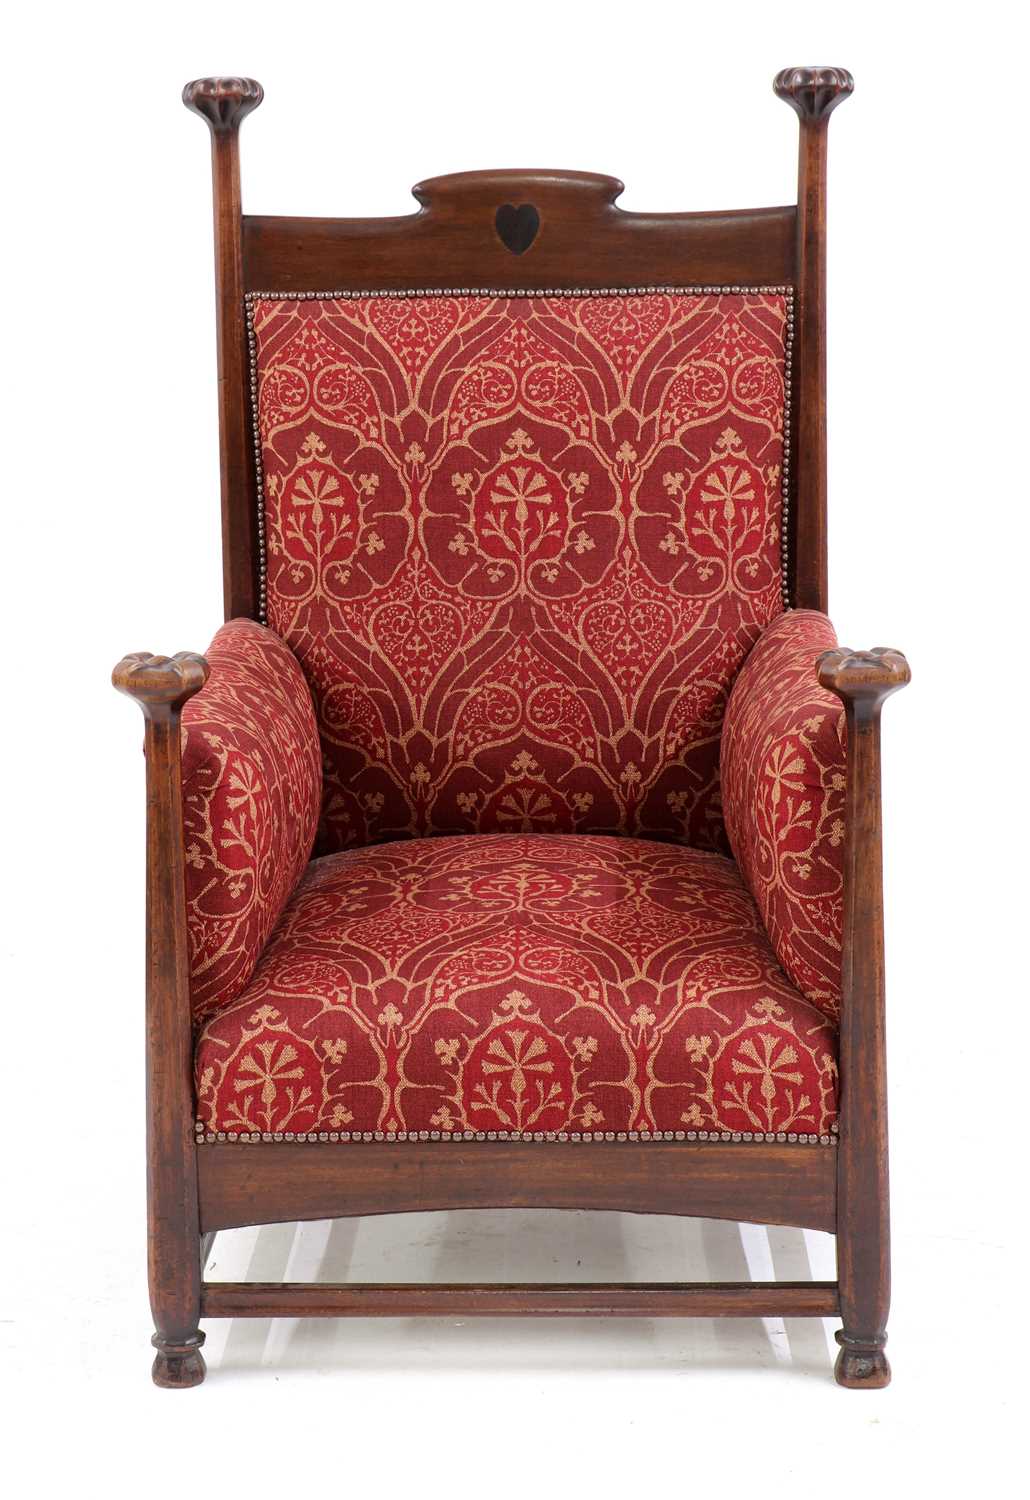 Lot 102 - An Arts and Crafts mahogany throne chair